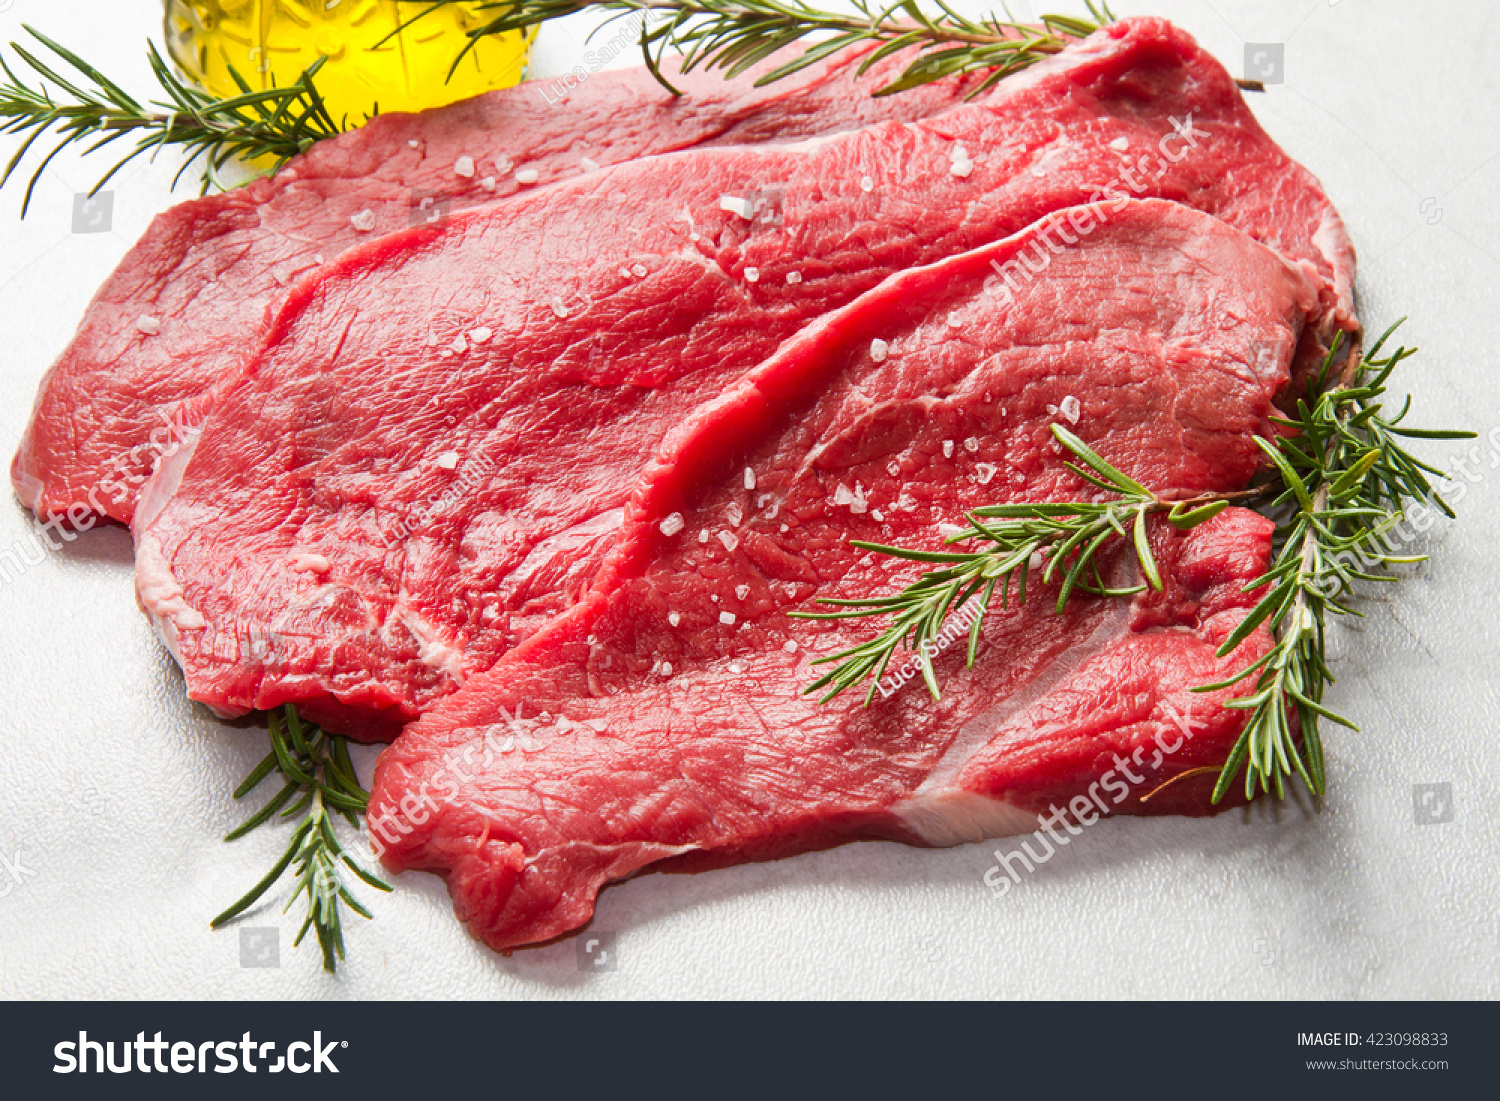 a red meat with rosemary on marble table #423098833